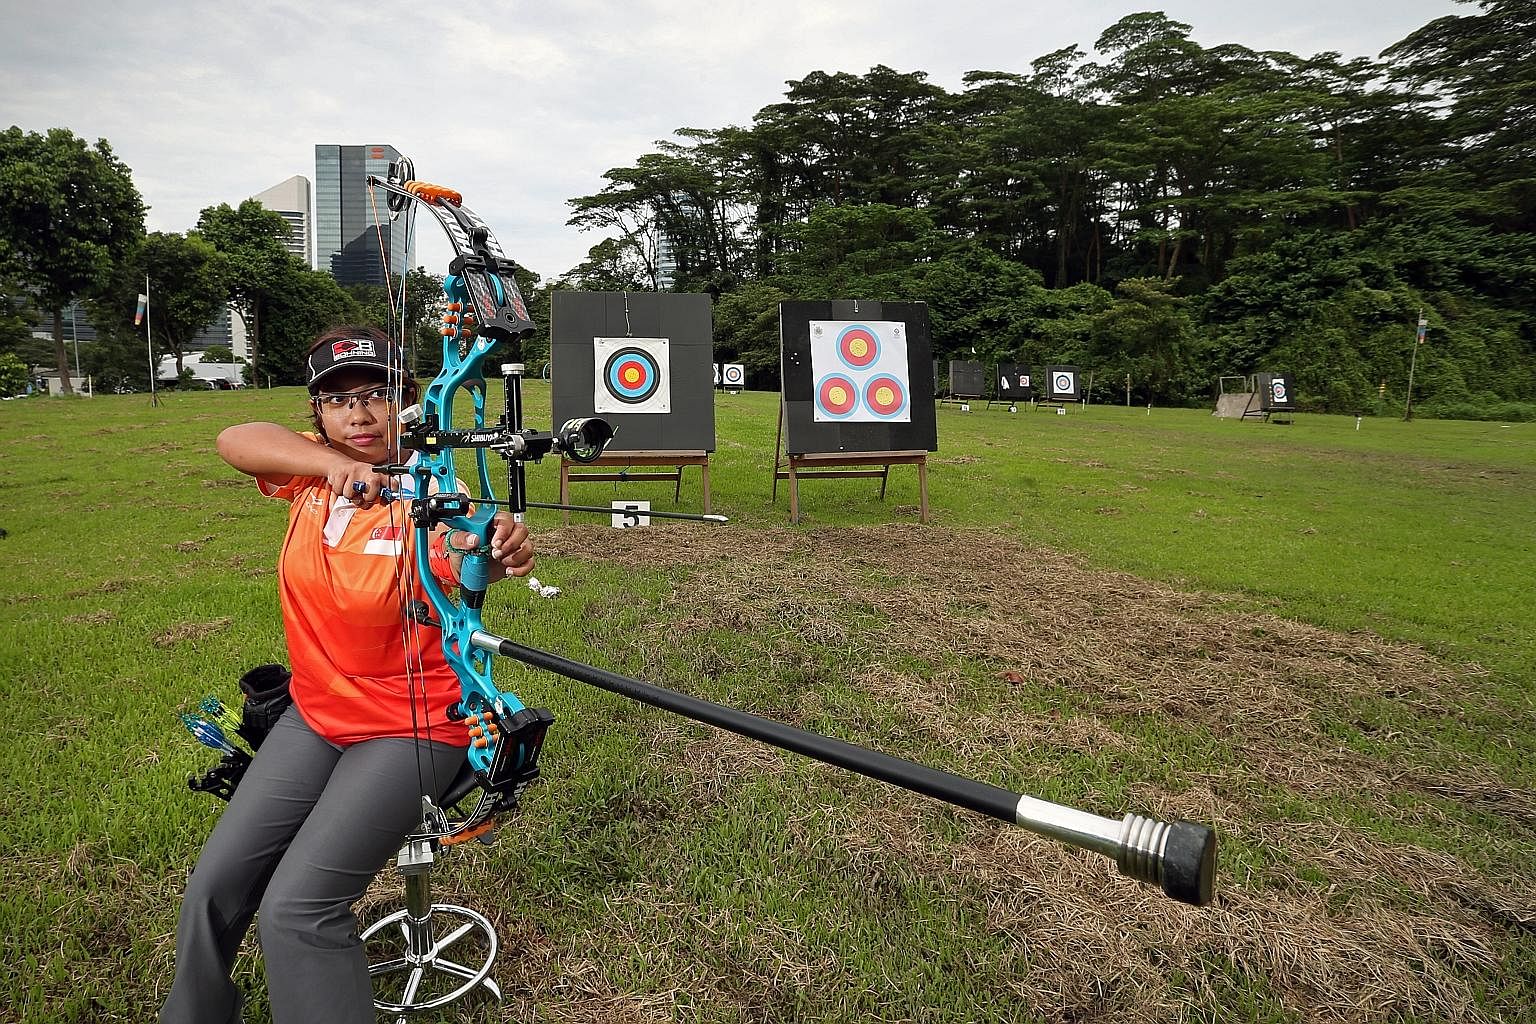 Para-archer Nur Syahidah Alim bagged two gold medals at her debut in the 2015 Asean Para Games and defended her gold at the 2017 Games. She was also the first female archer to represent Singapore at the 2016 Paralympics in Rio.